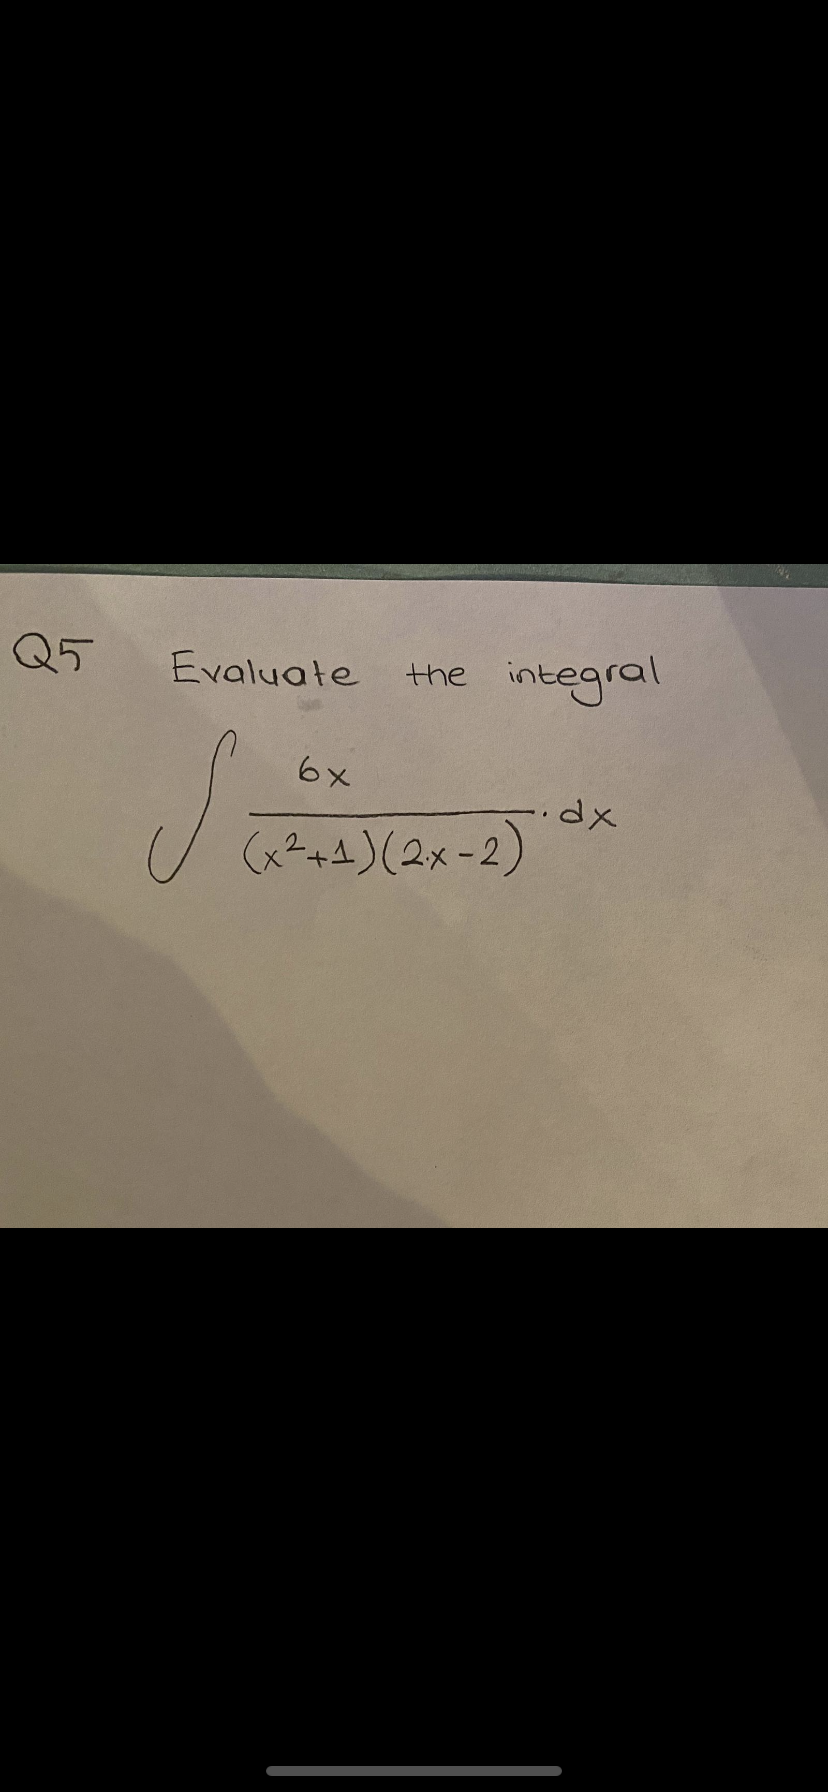 Evaluate
integral
the
6x
..d.
(x²+4)(2x-2)
